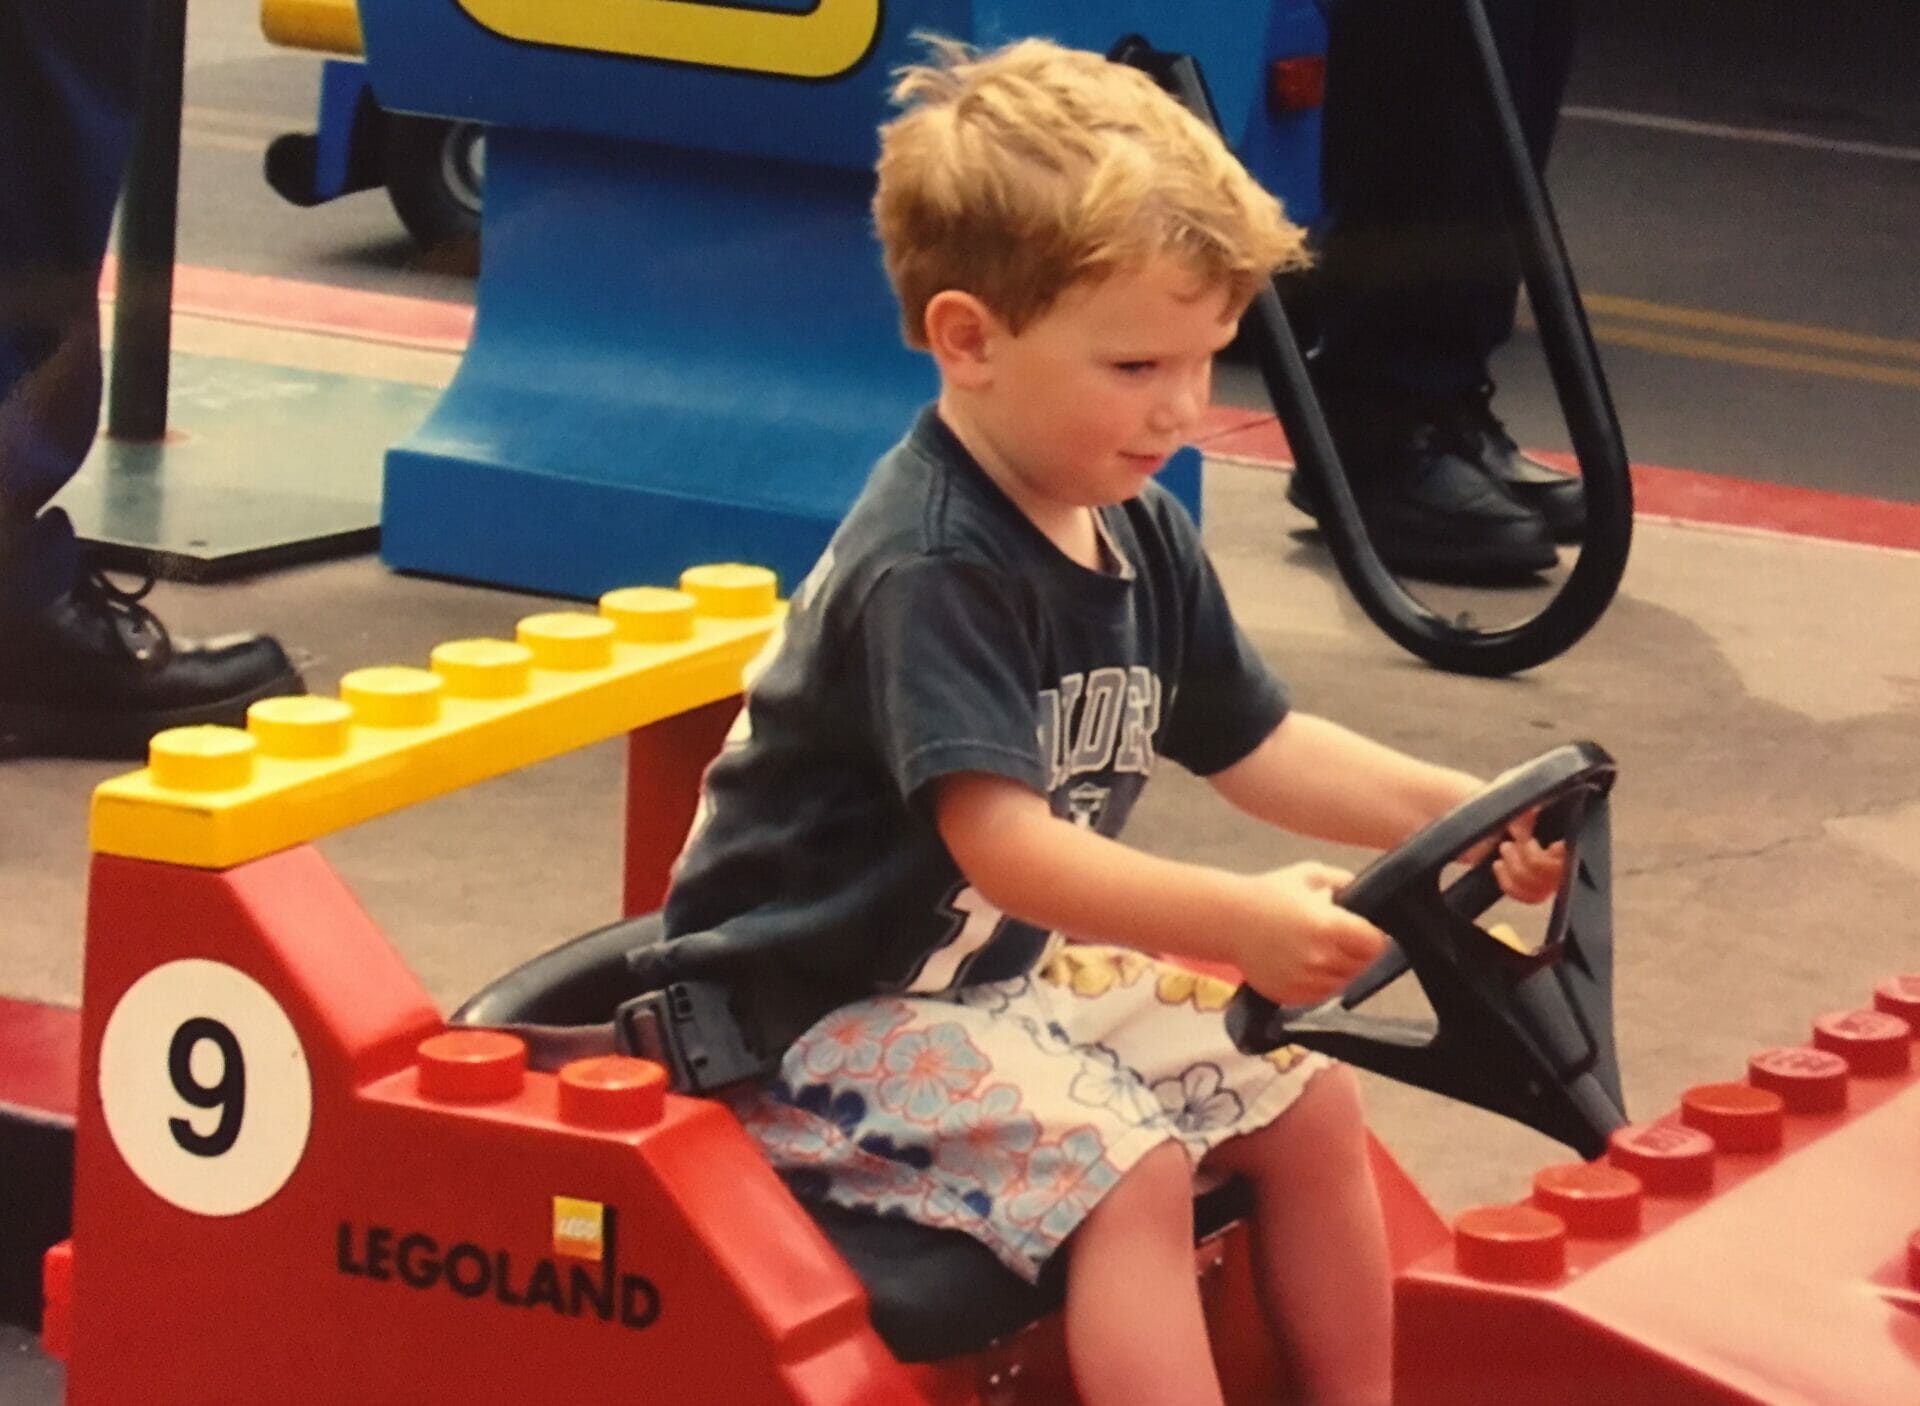 My son as a toddler carefully driving a small Lego car at Legoland